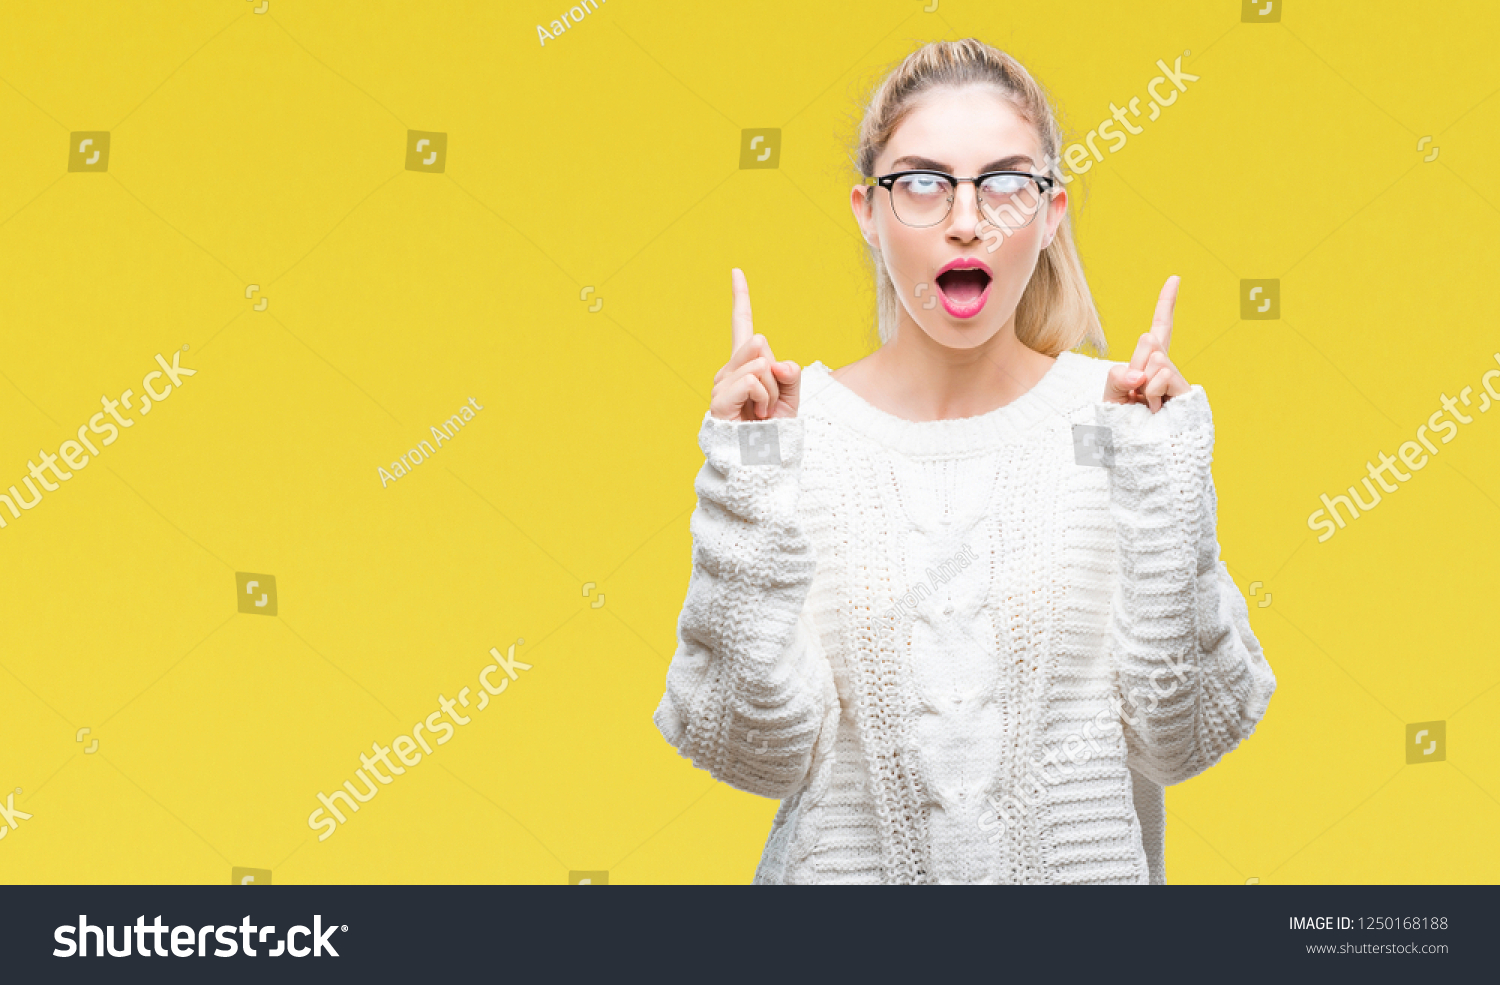 Young beautiful blonde woman wearing glasses over isolated background amazed and surprised looking up and pointing with fingers and raised arms. #1250168188